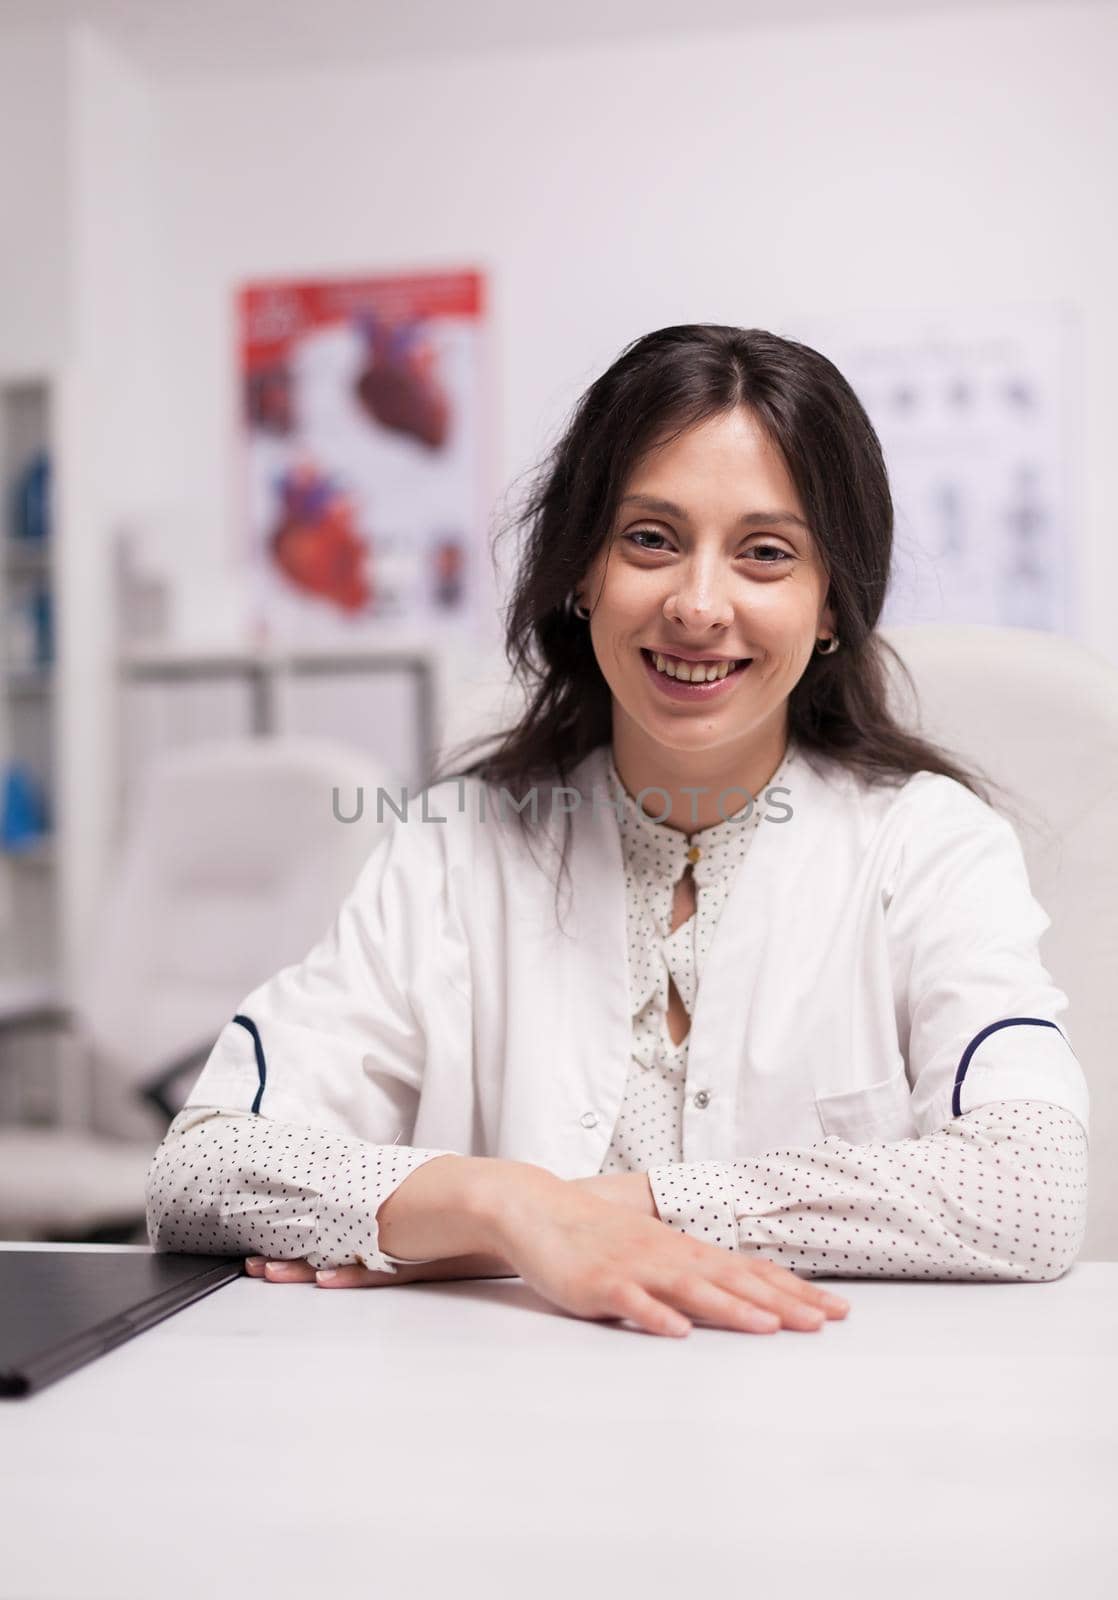 Portrait of smiling woman physician at desk in hospital office wearing white coat looking at the camera.